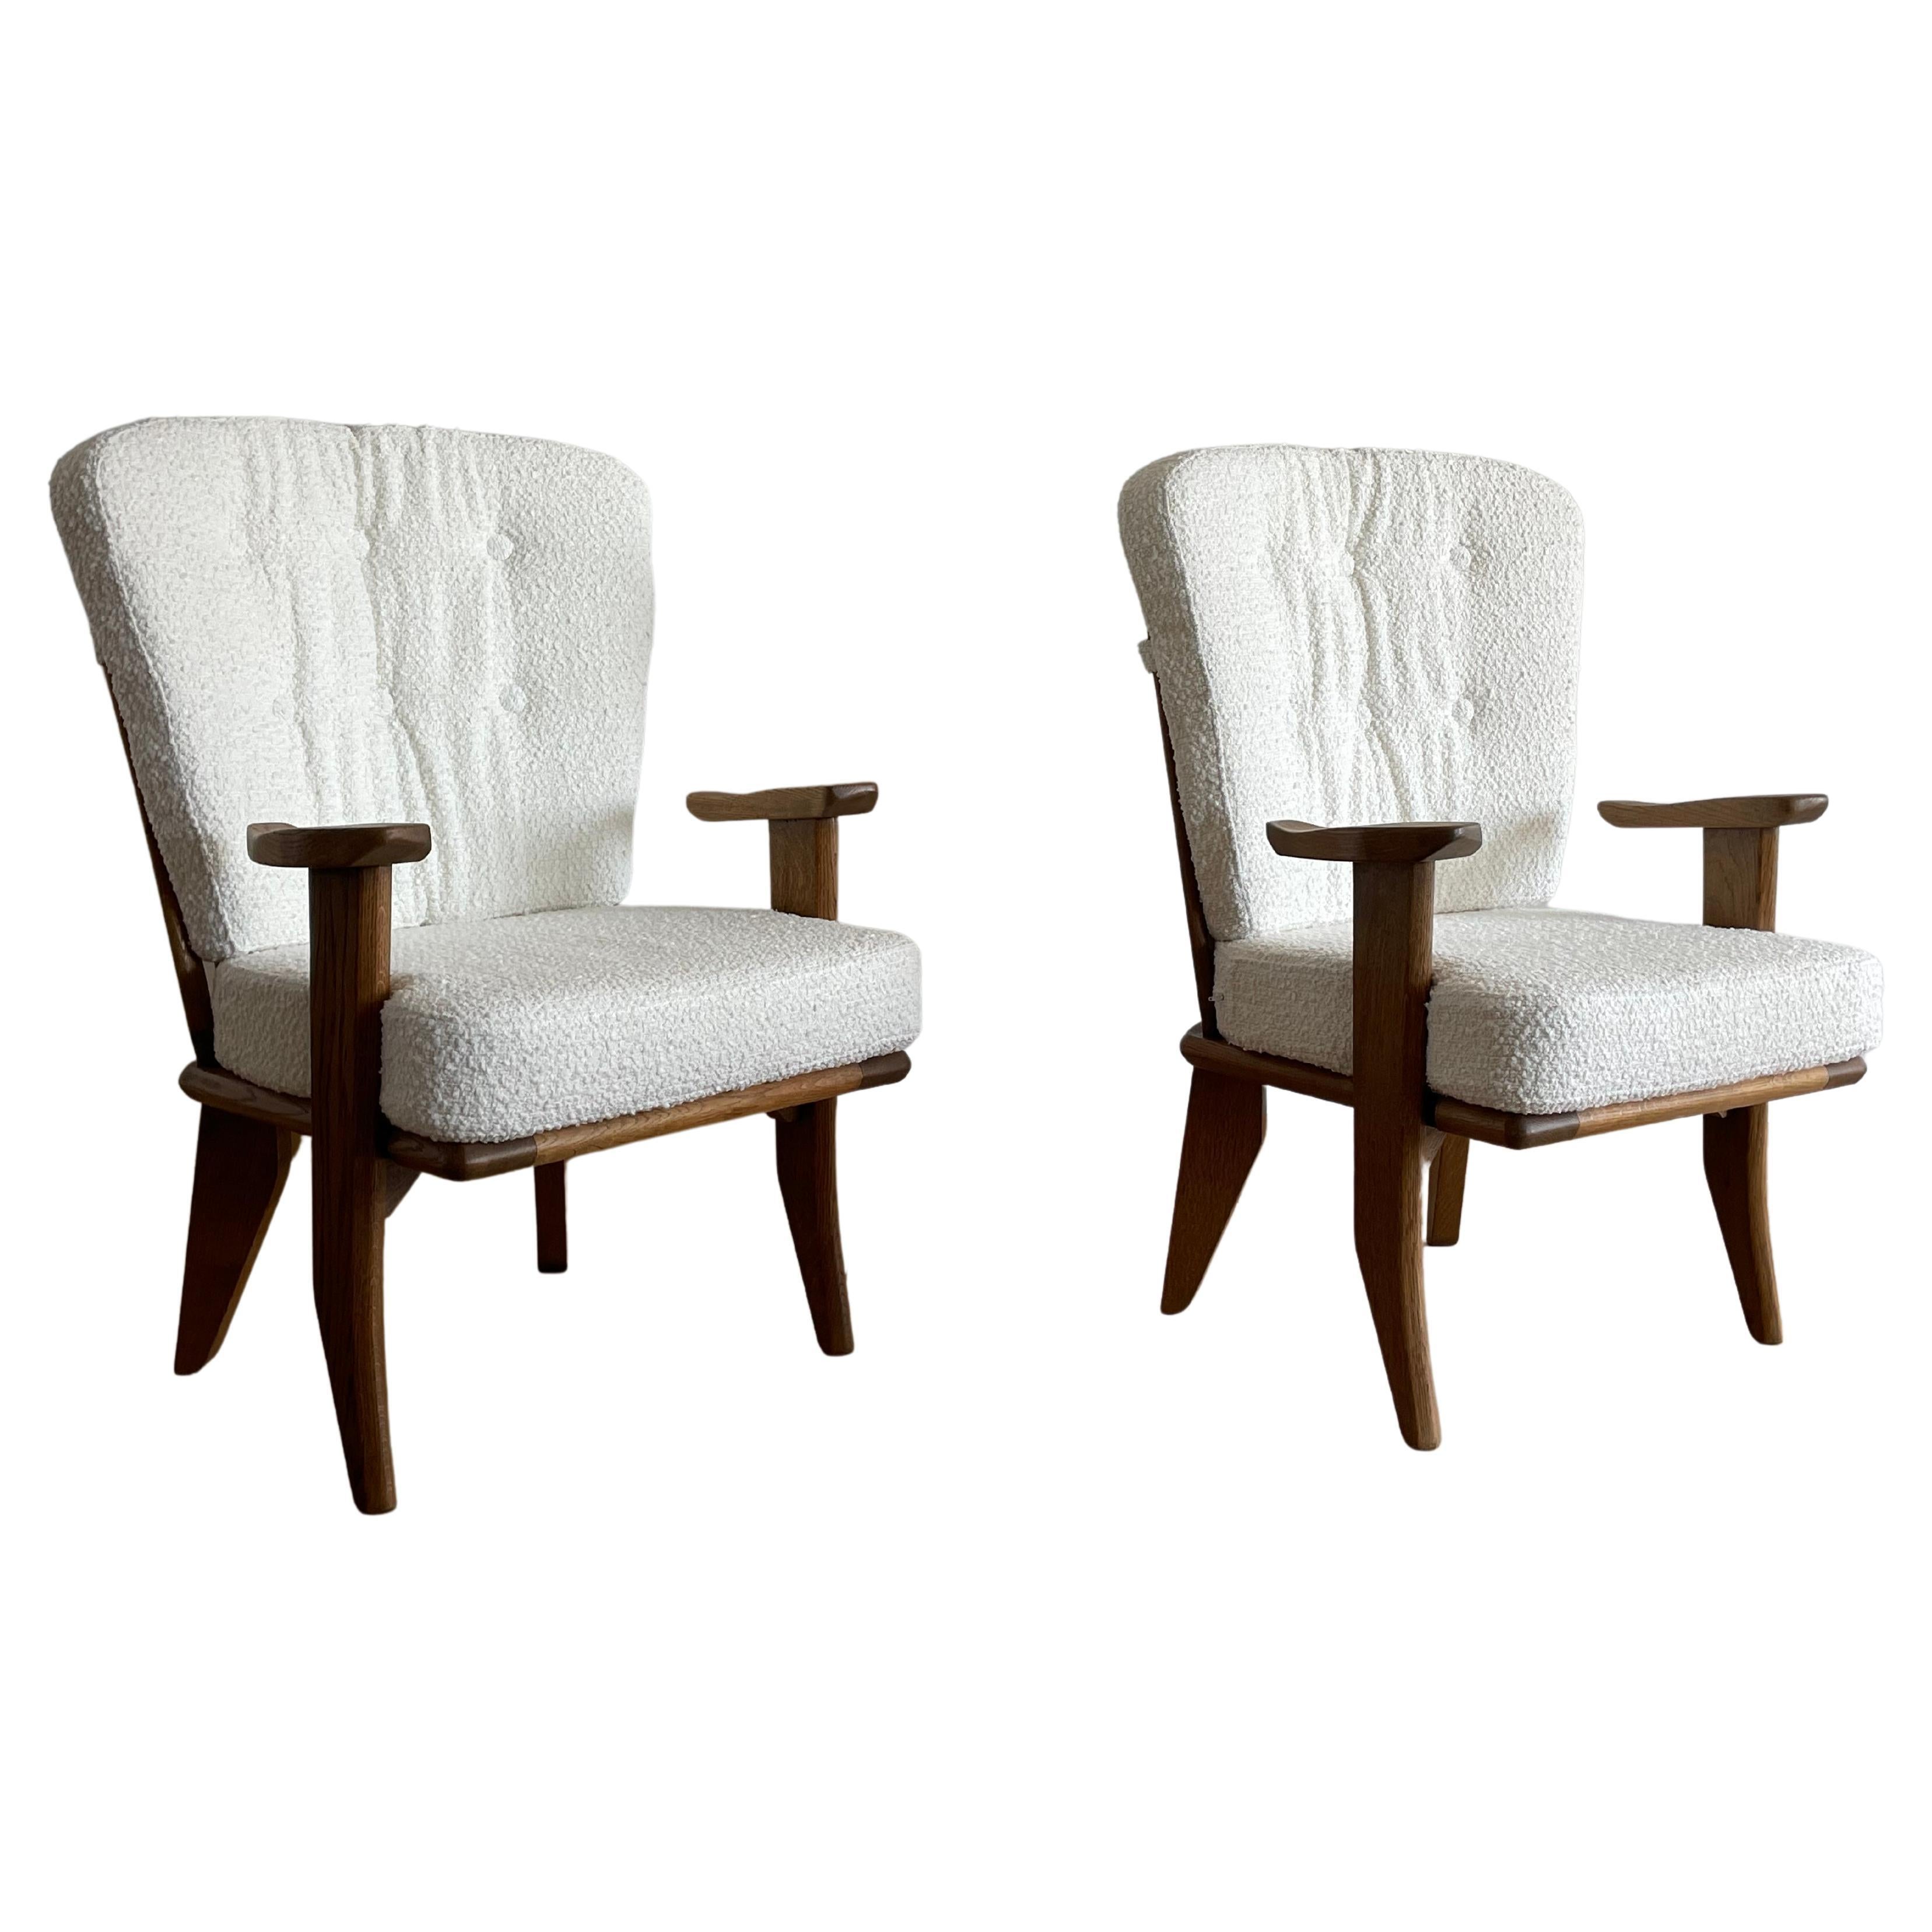 Pair of French Oak Armchairs by Guillerme et Chambron, France, 1960s For Sale